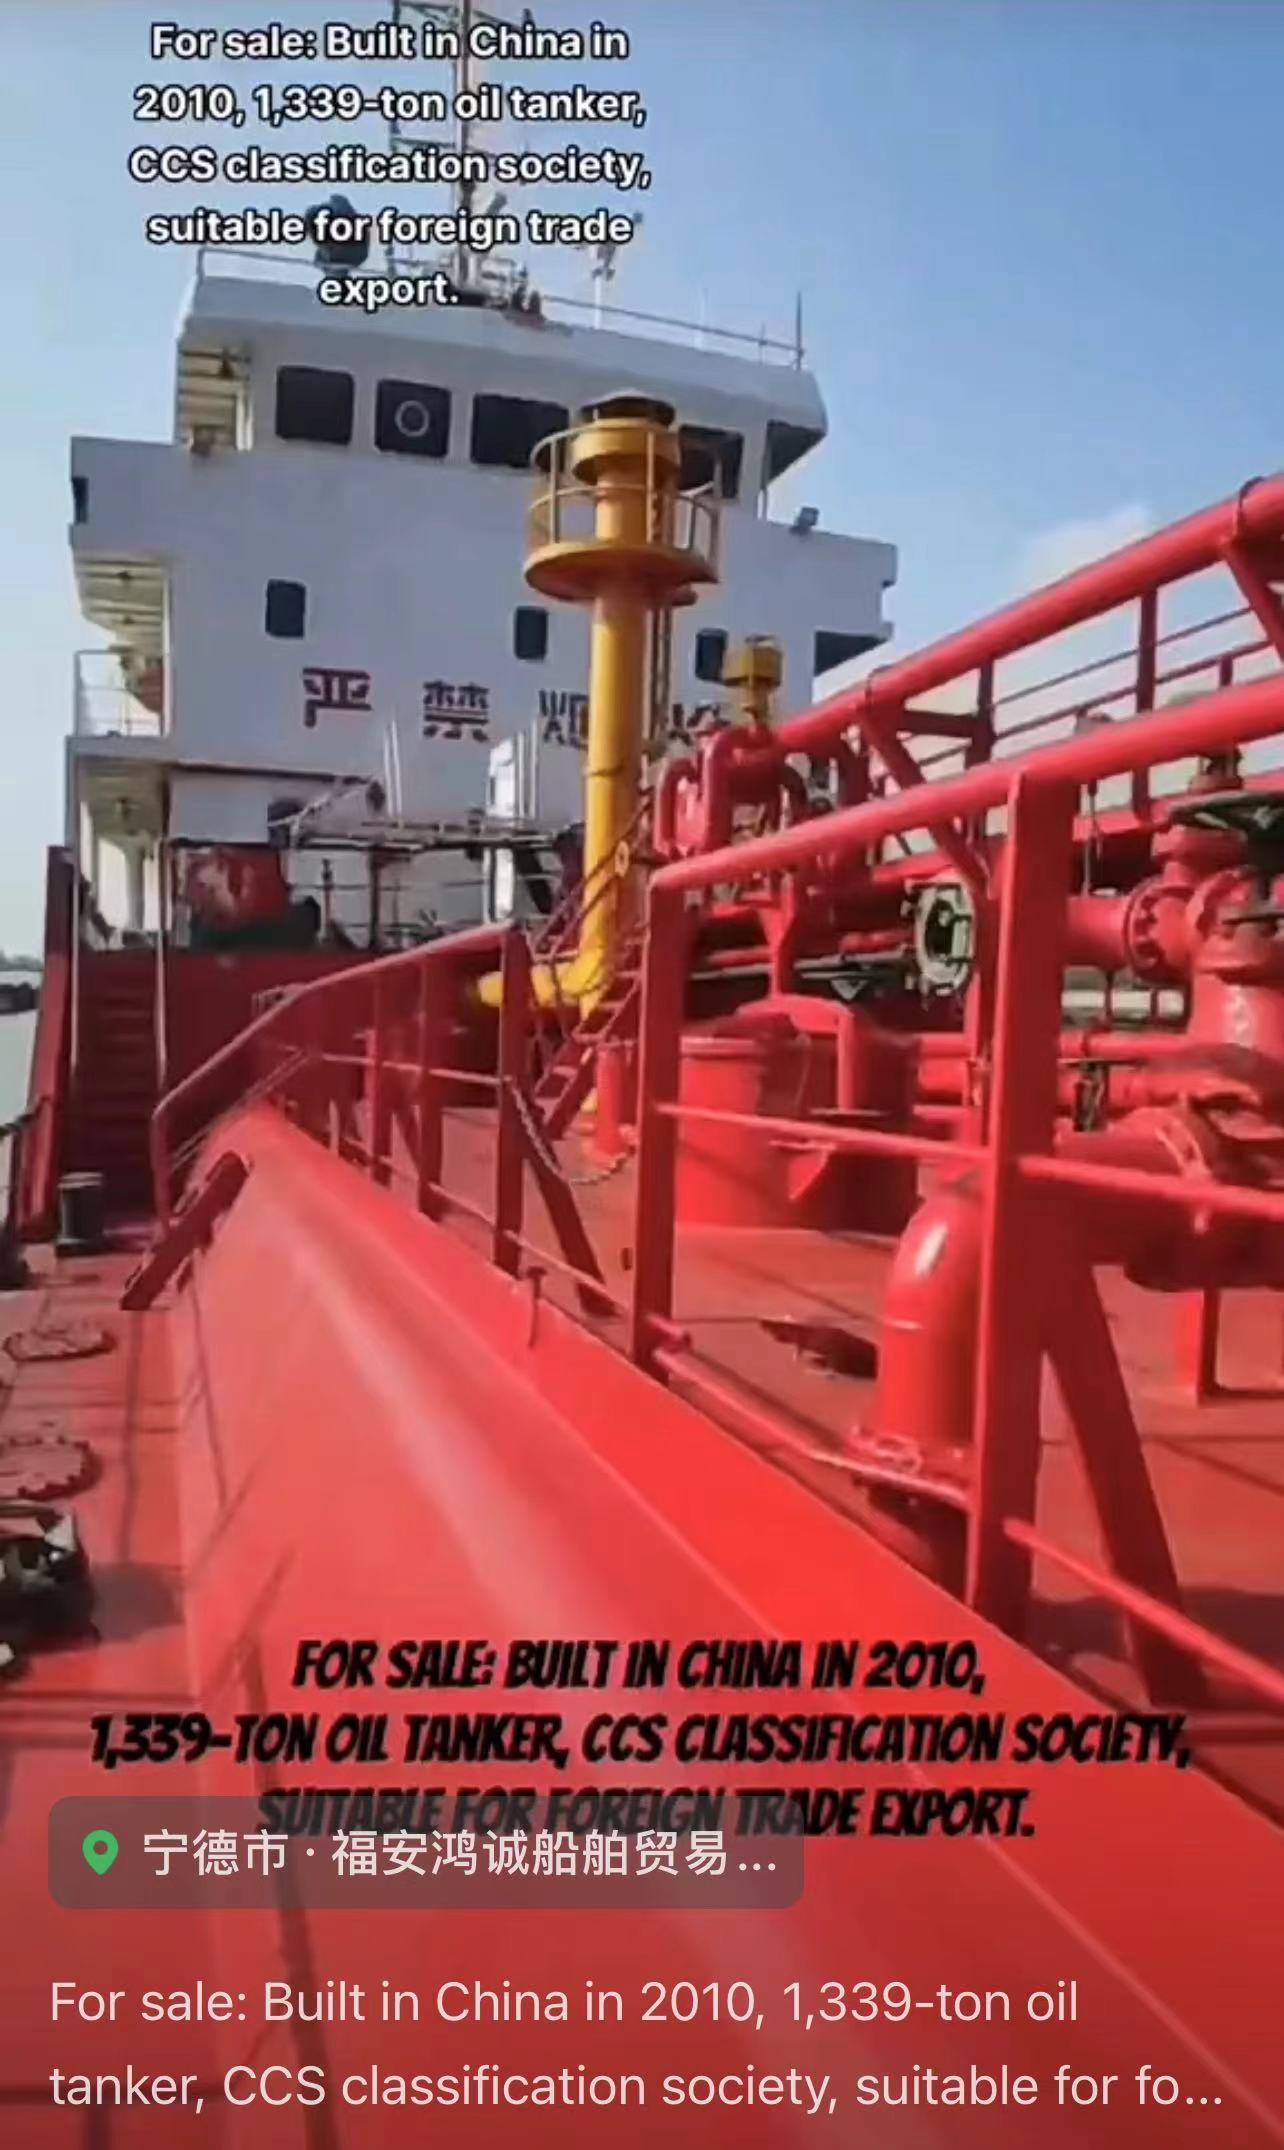 For sale: Built in China in 2010, 1,339-ton oil tanker, CCS classification society, suitable for foreign trade export.